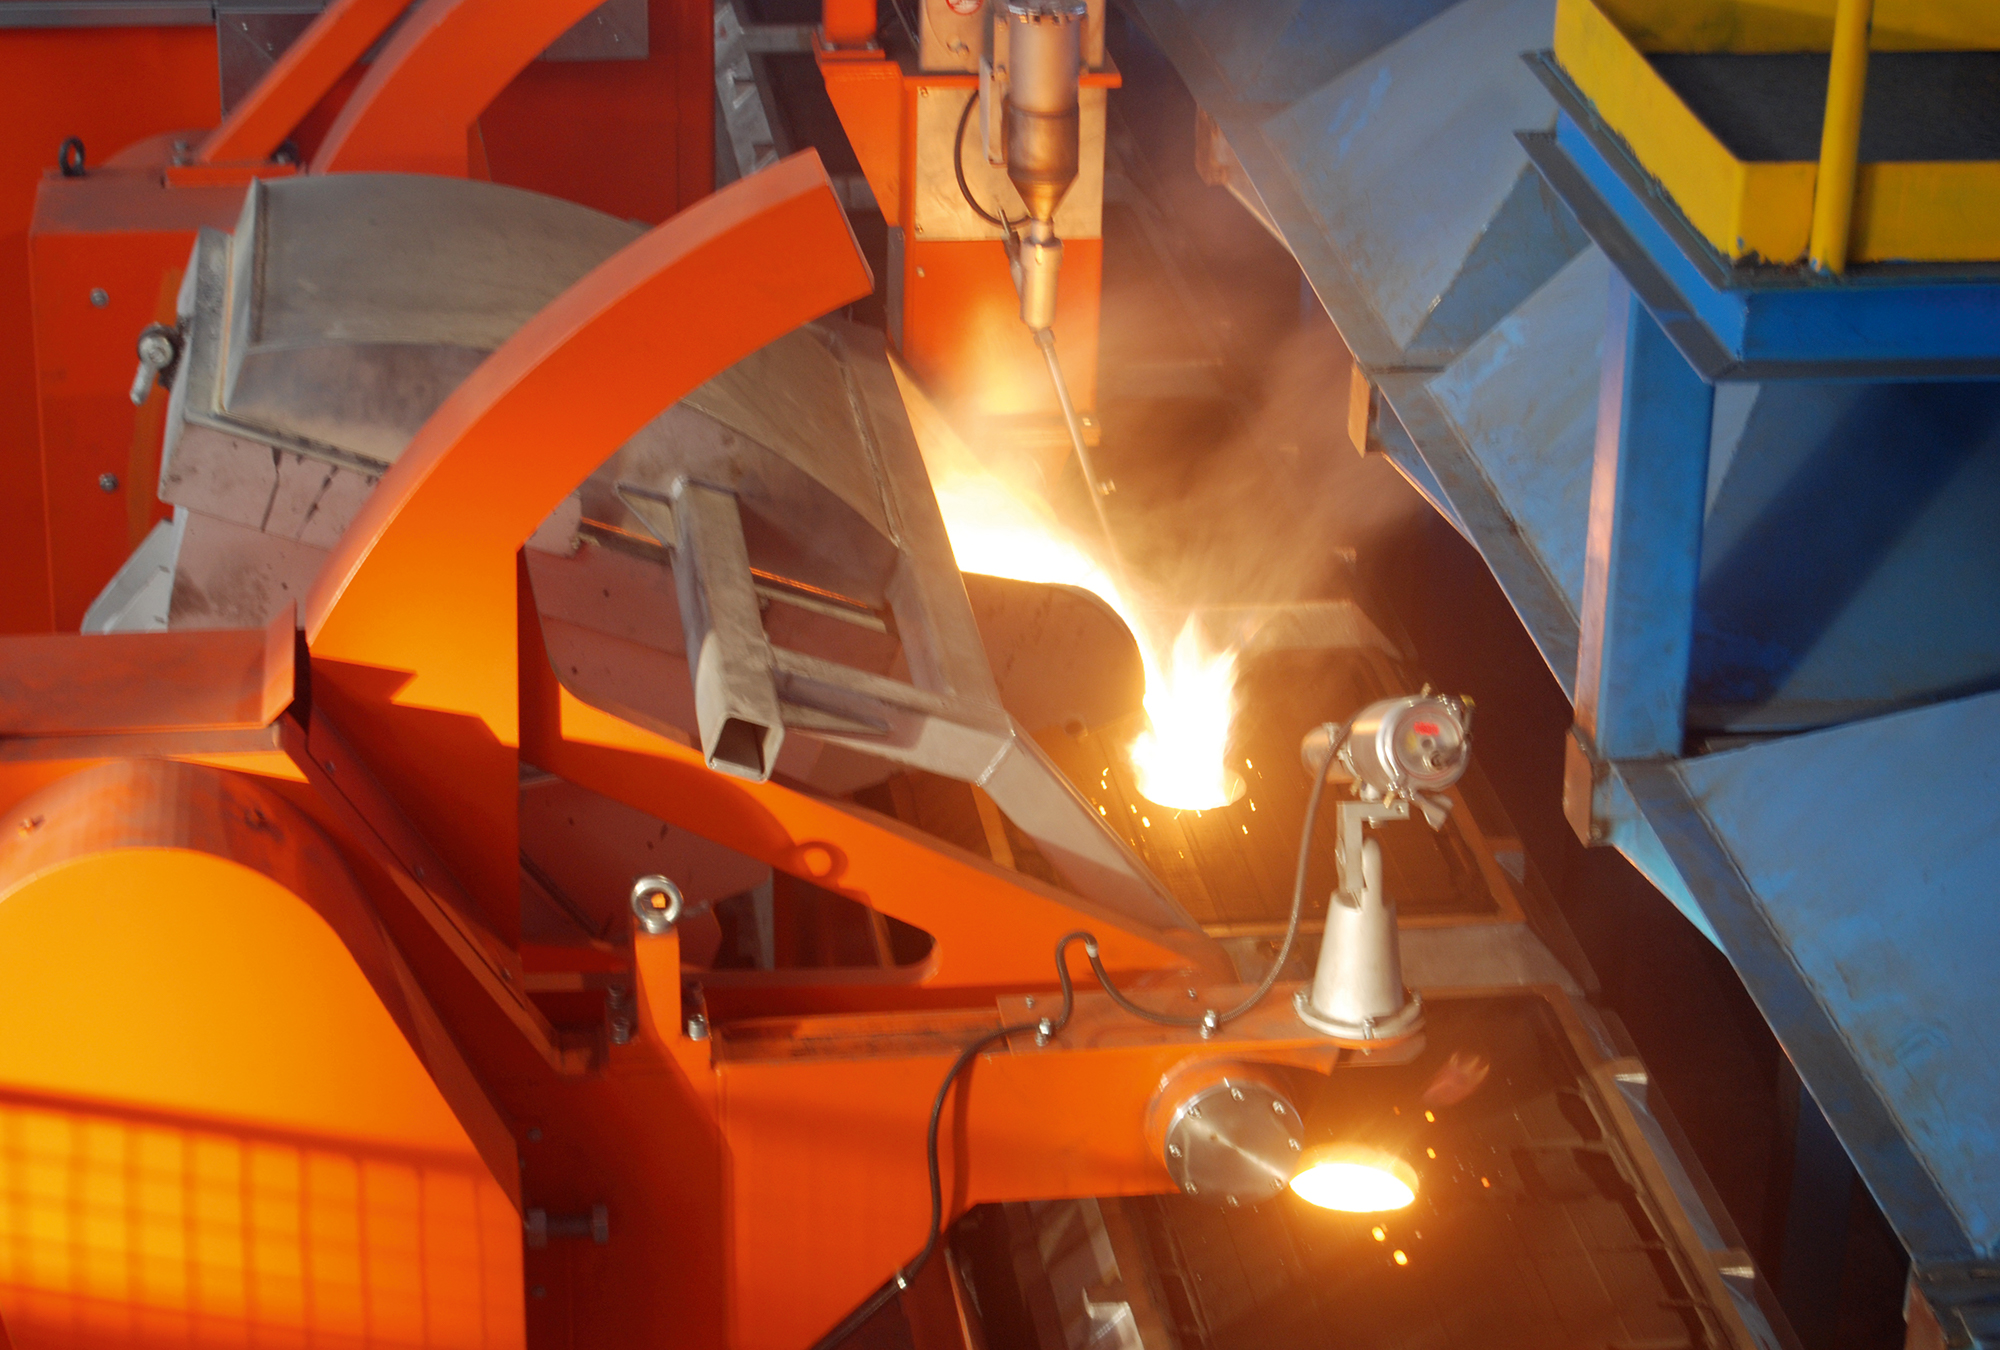 Grenzebach selects the ideal casting process for customers and works together with numerous foundries.